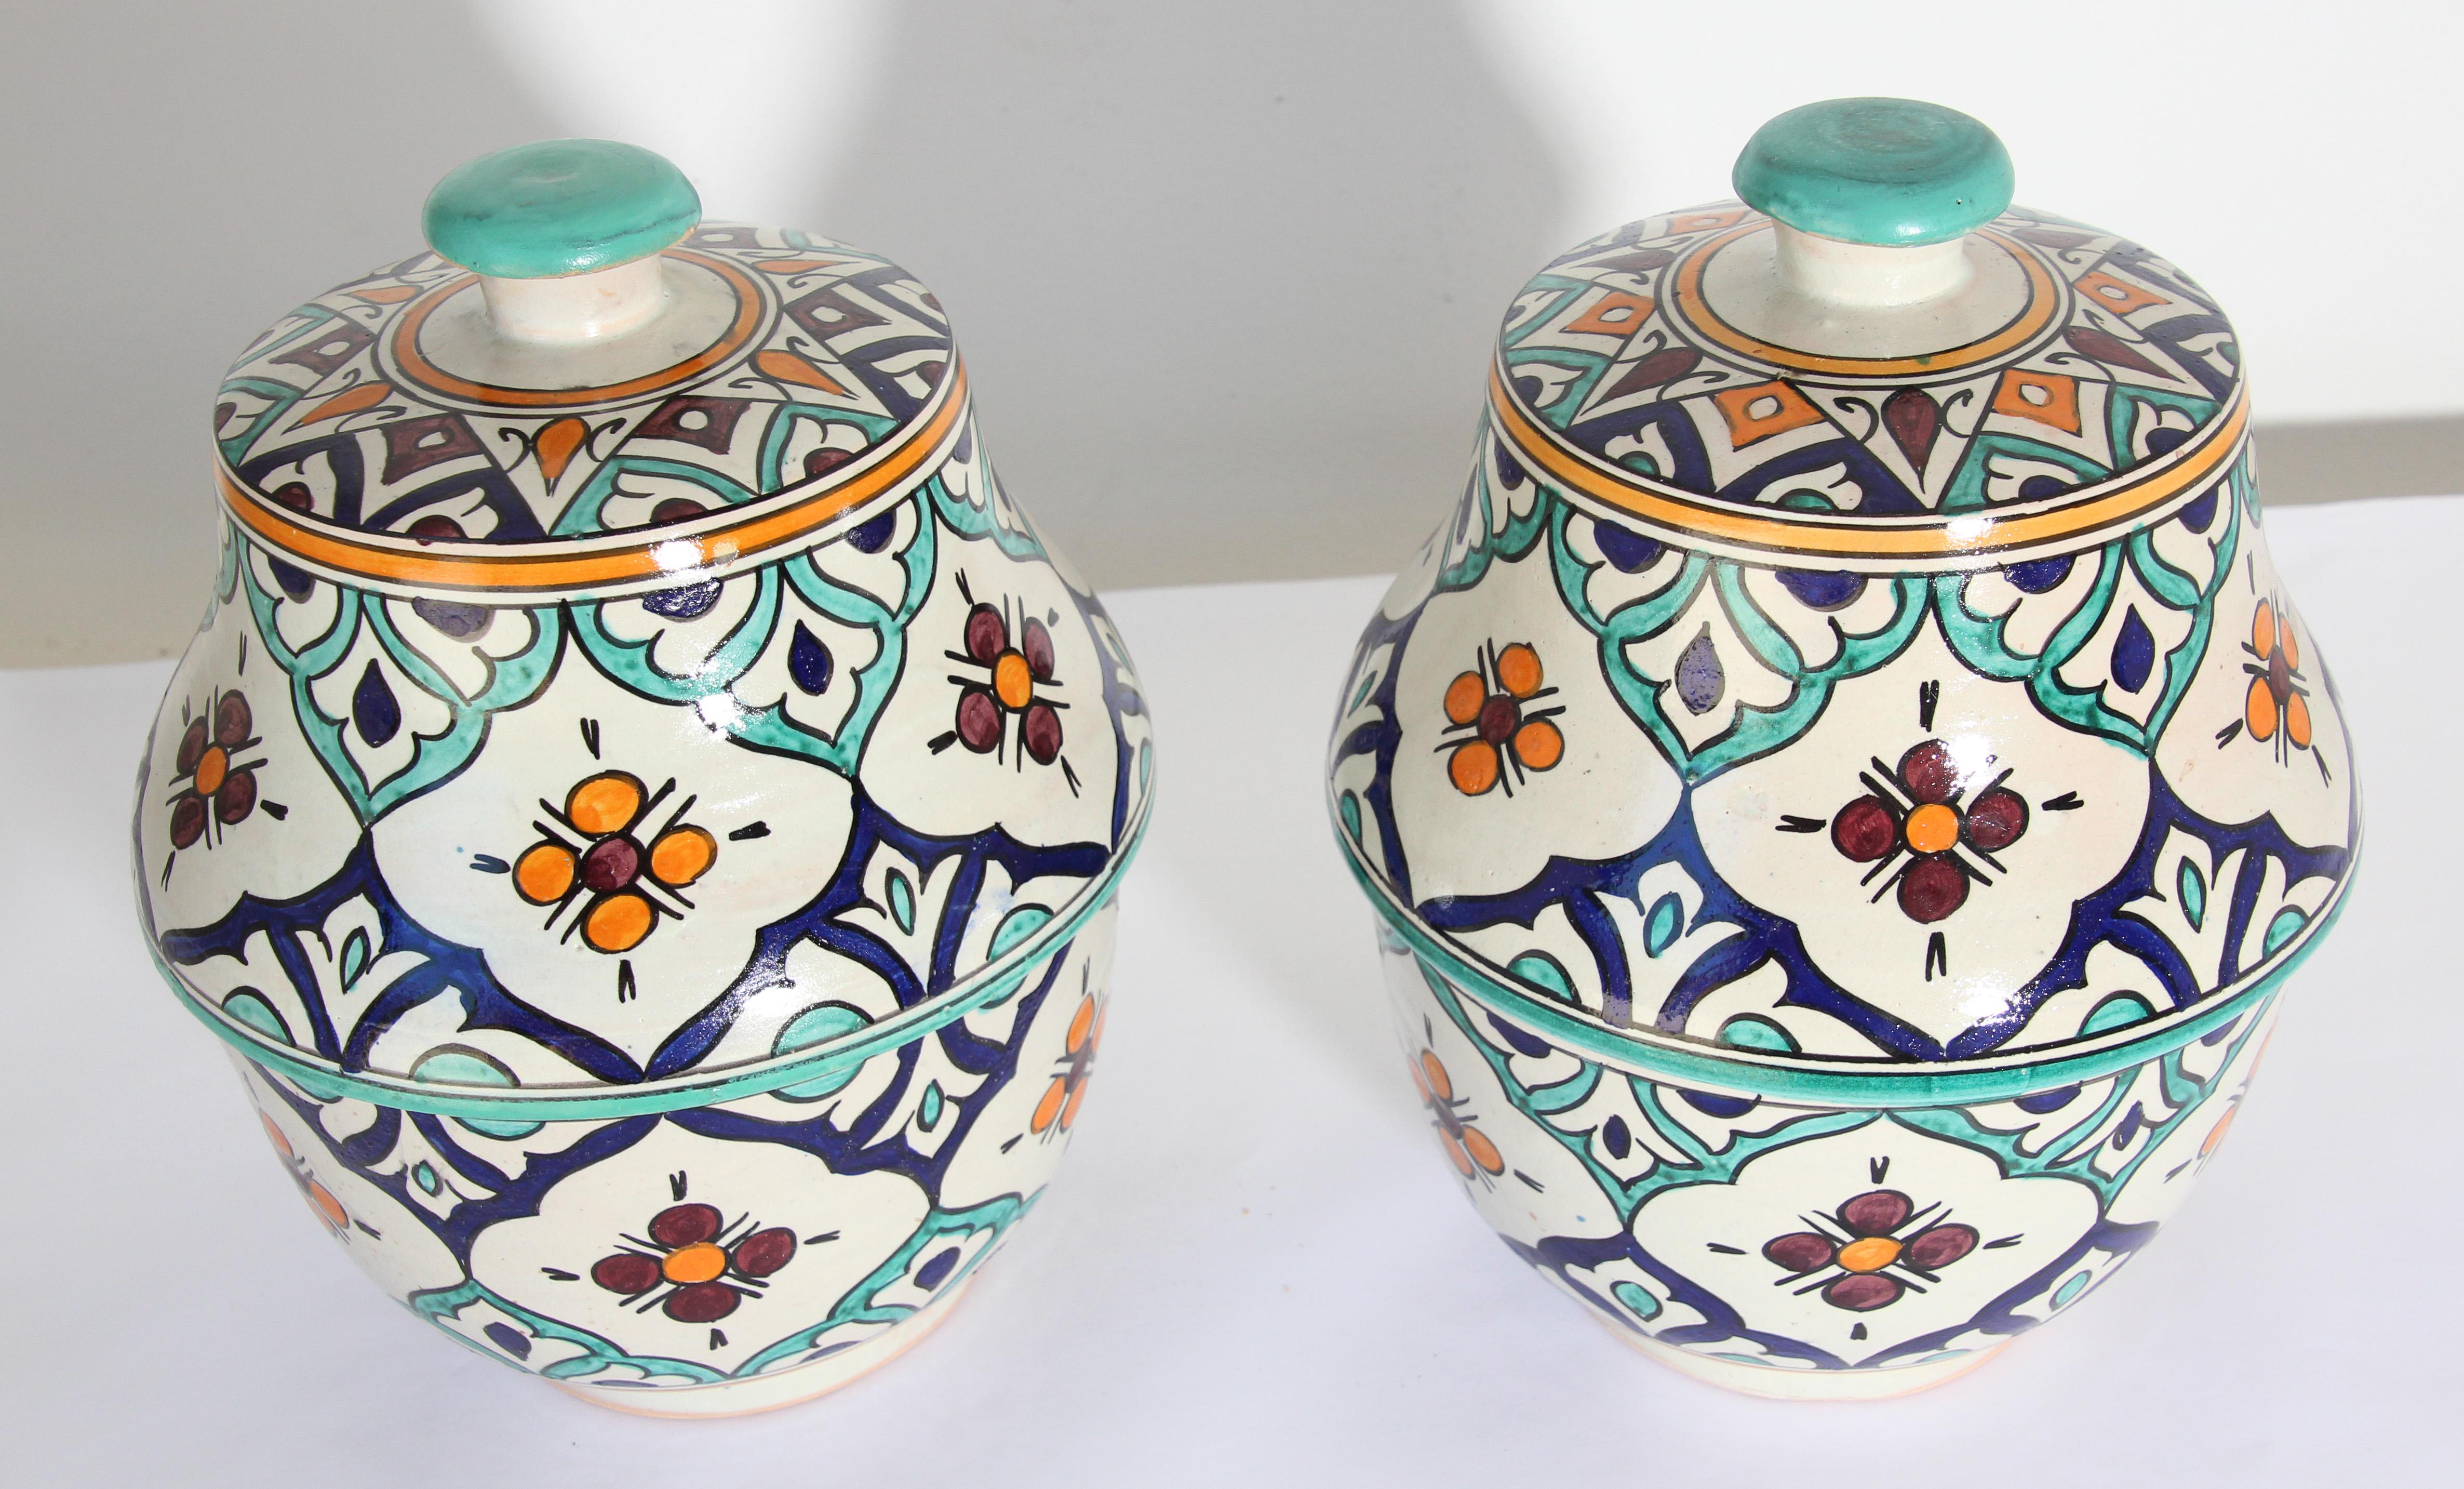 Hand-Crafted Moorish Ceramic Glazed Covered Urns Handcrafted in Fez Morocco For Sale